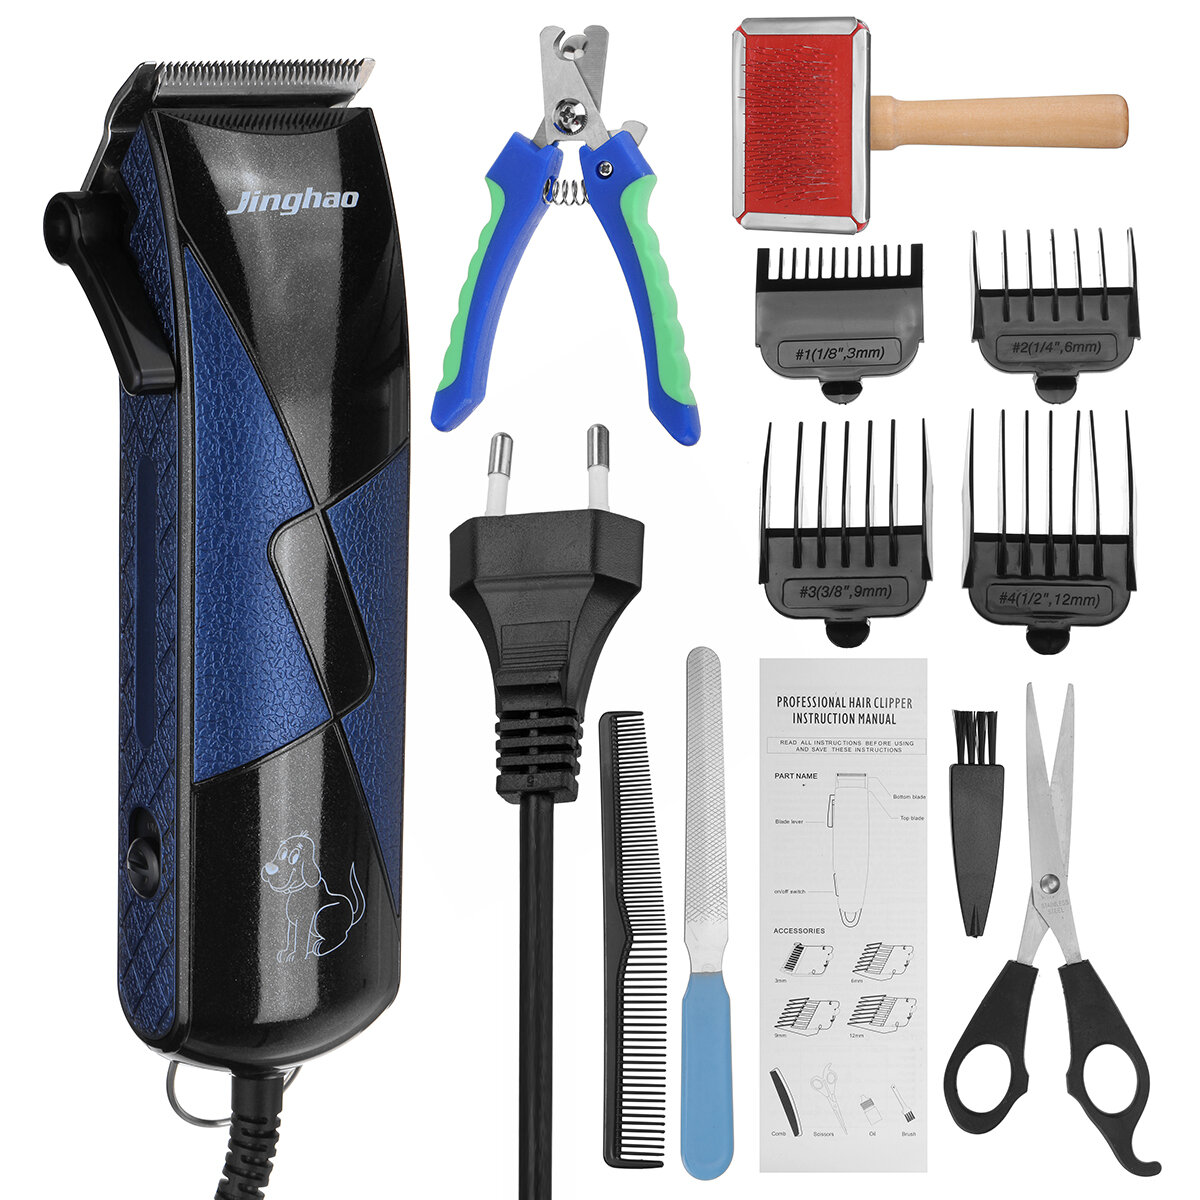 

220V Pets Hair Clipper Grooming Kit Electric Hair Trimmer Dog Goat Anmimal Hair Shaving Machine Tool